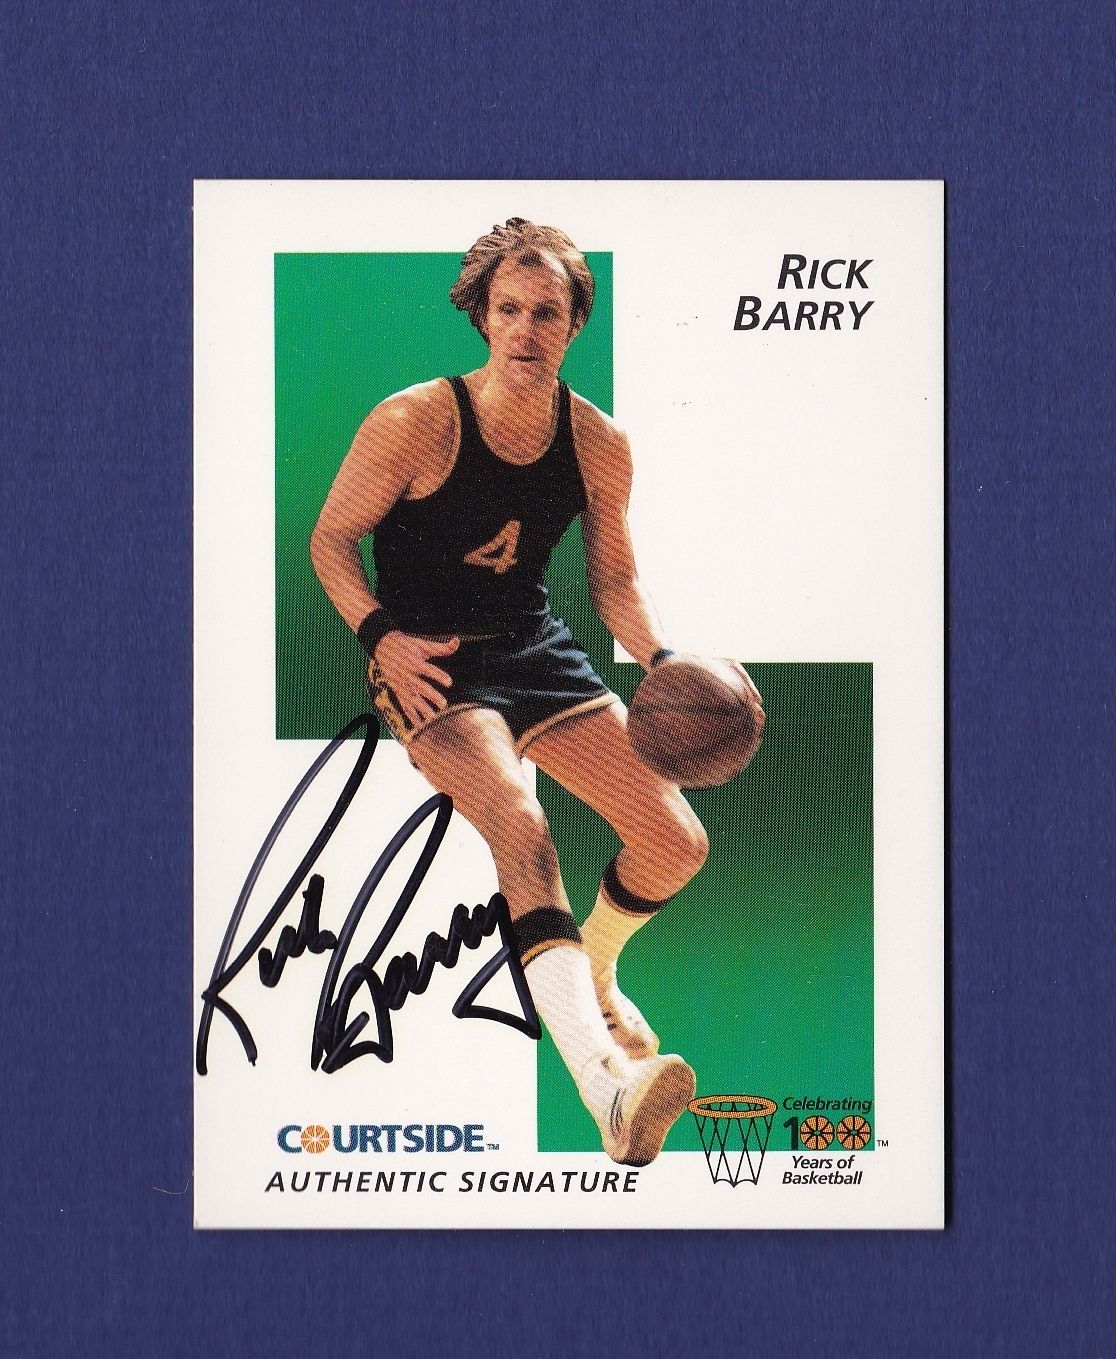  Rick Barry - 1992 Courtside #3 AUTOGRAPHED (Univ. of Miami) Baseball cards value